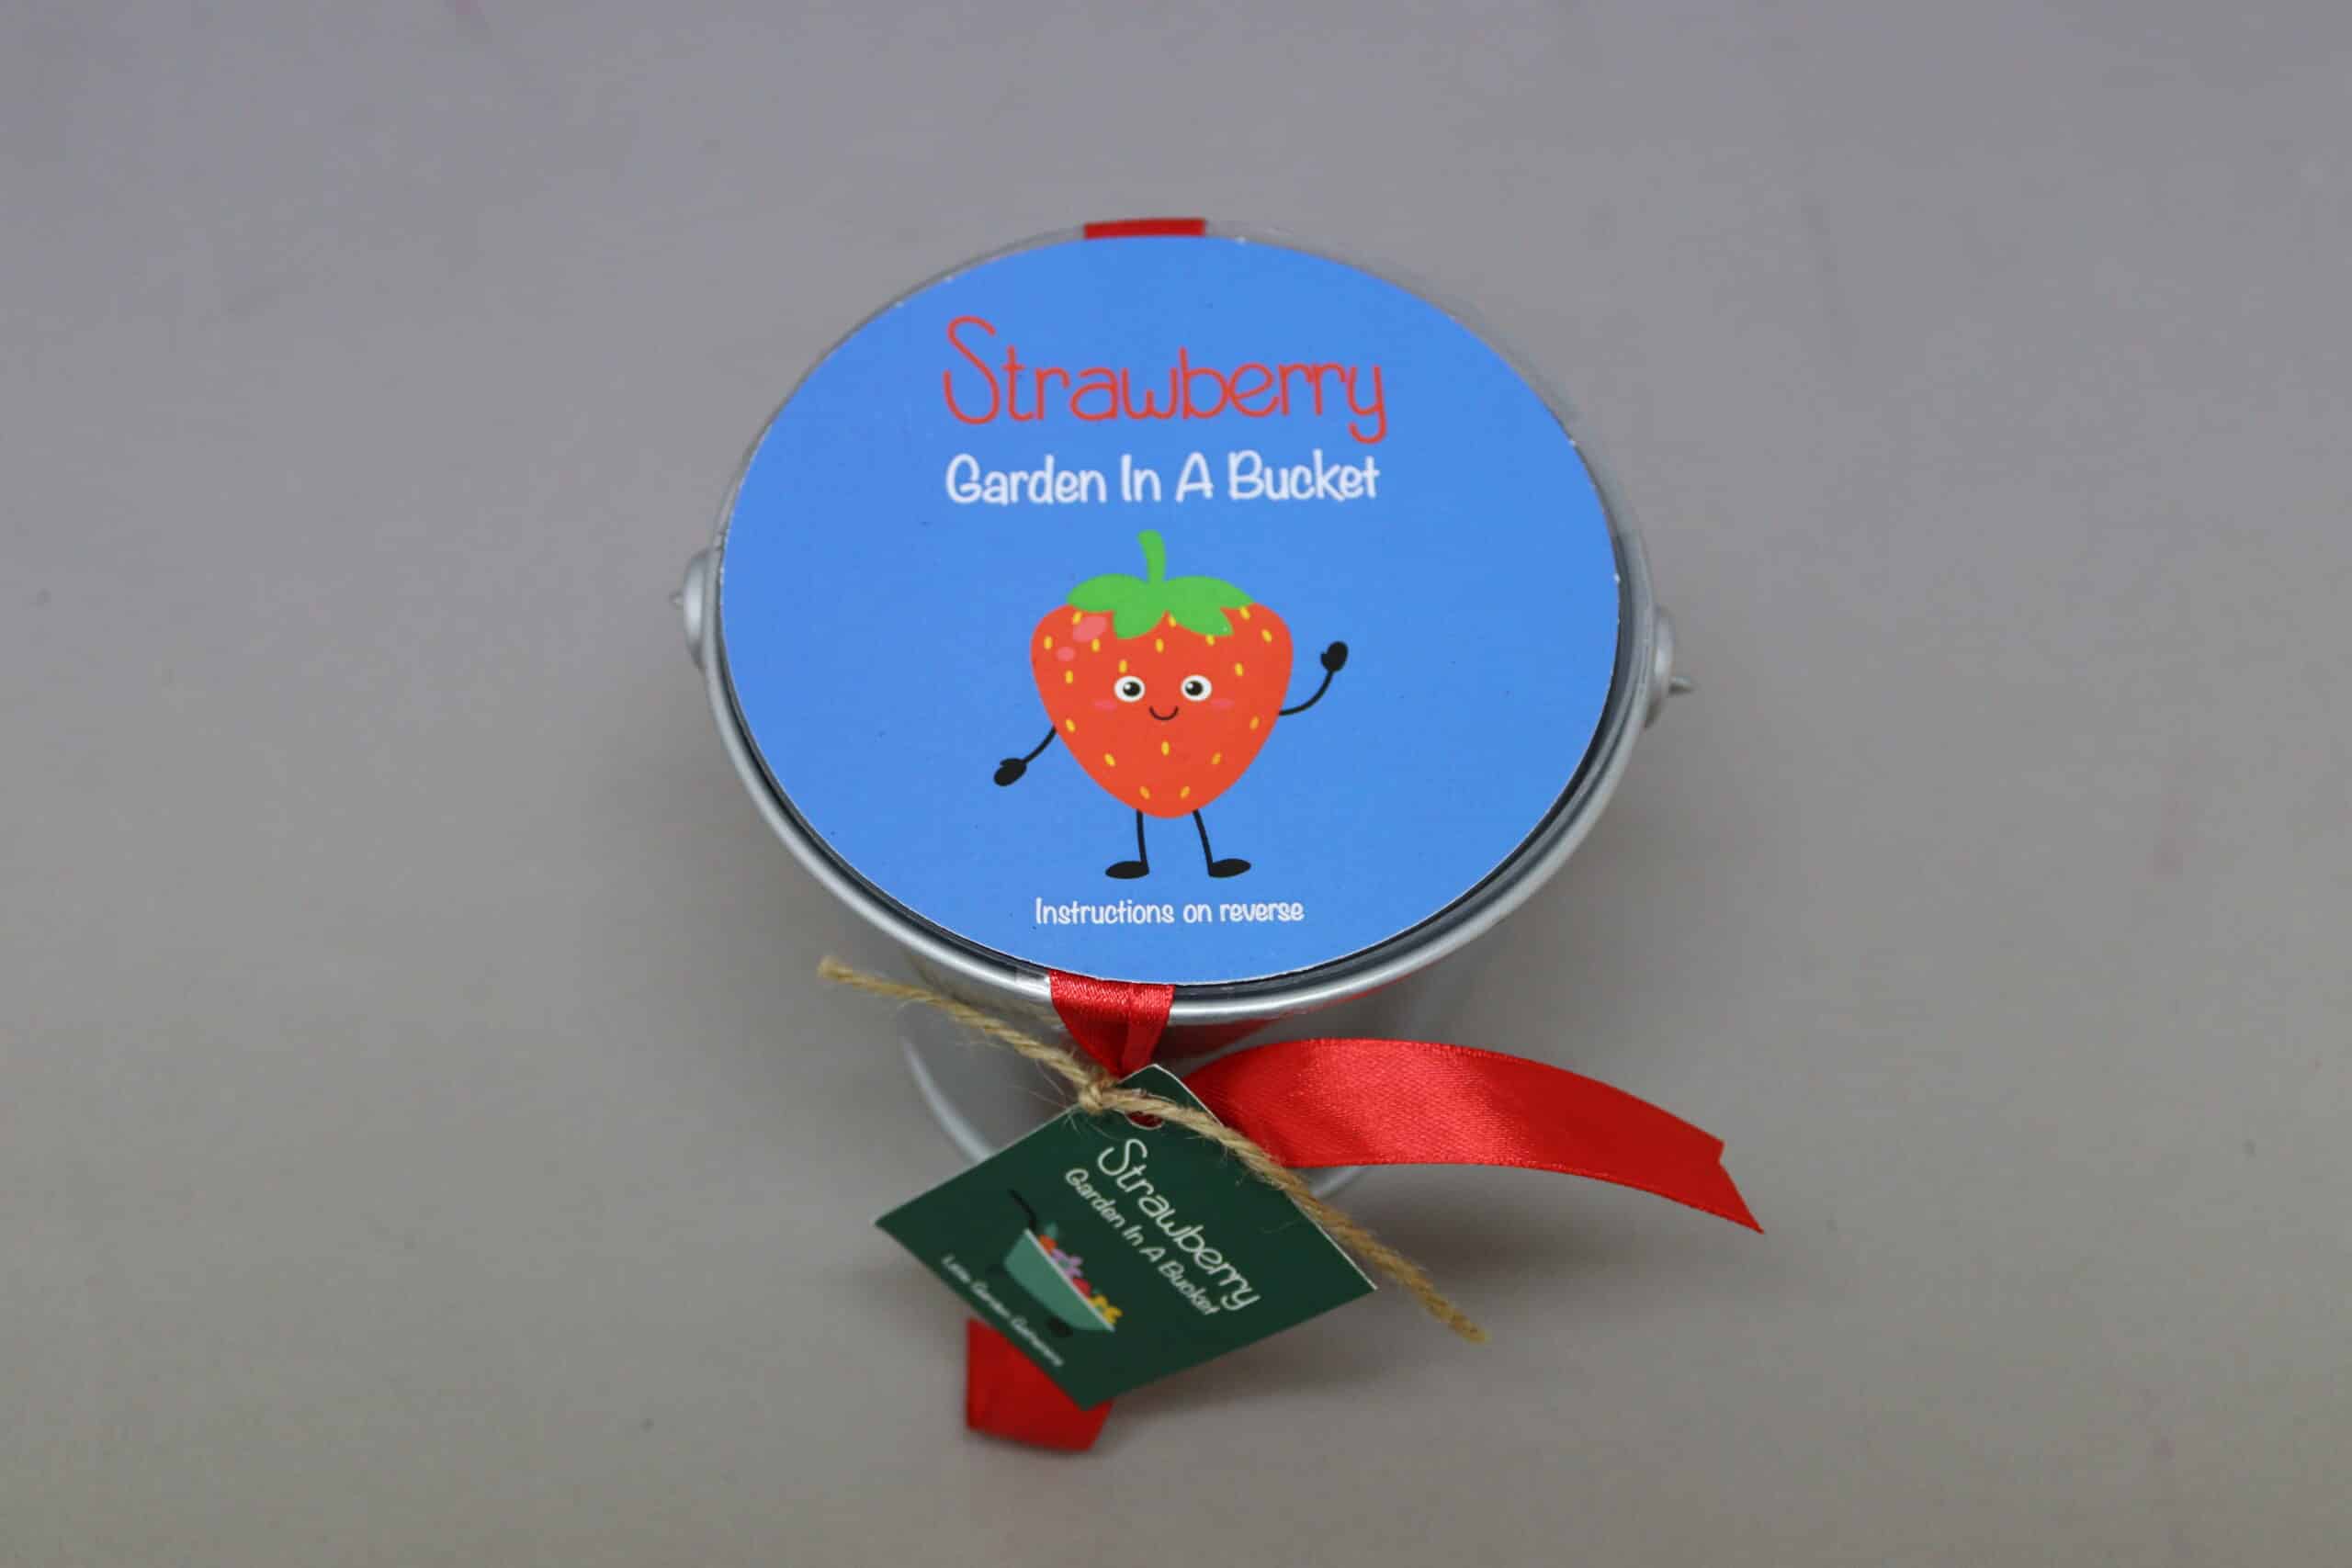 Branded blue lid and red ribbon on a small silver bucket containing seeds and soil to grow strawberries.